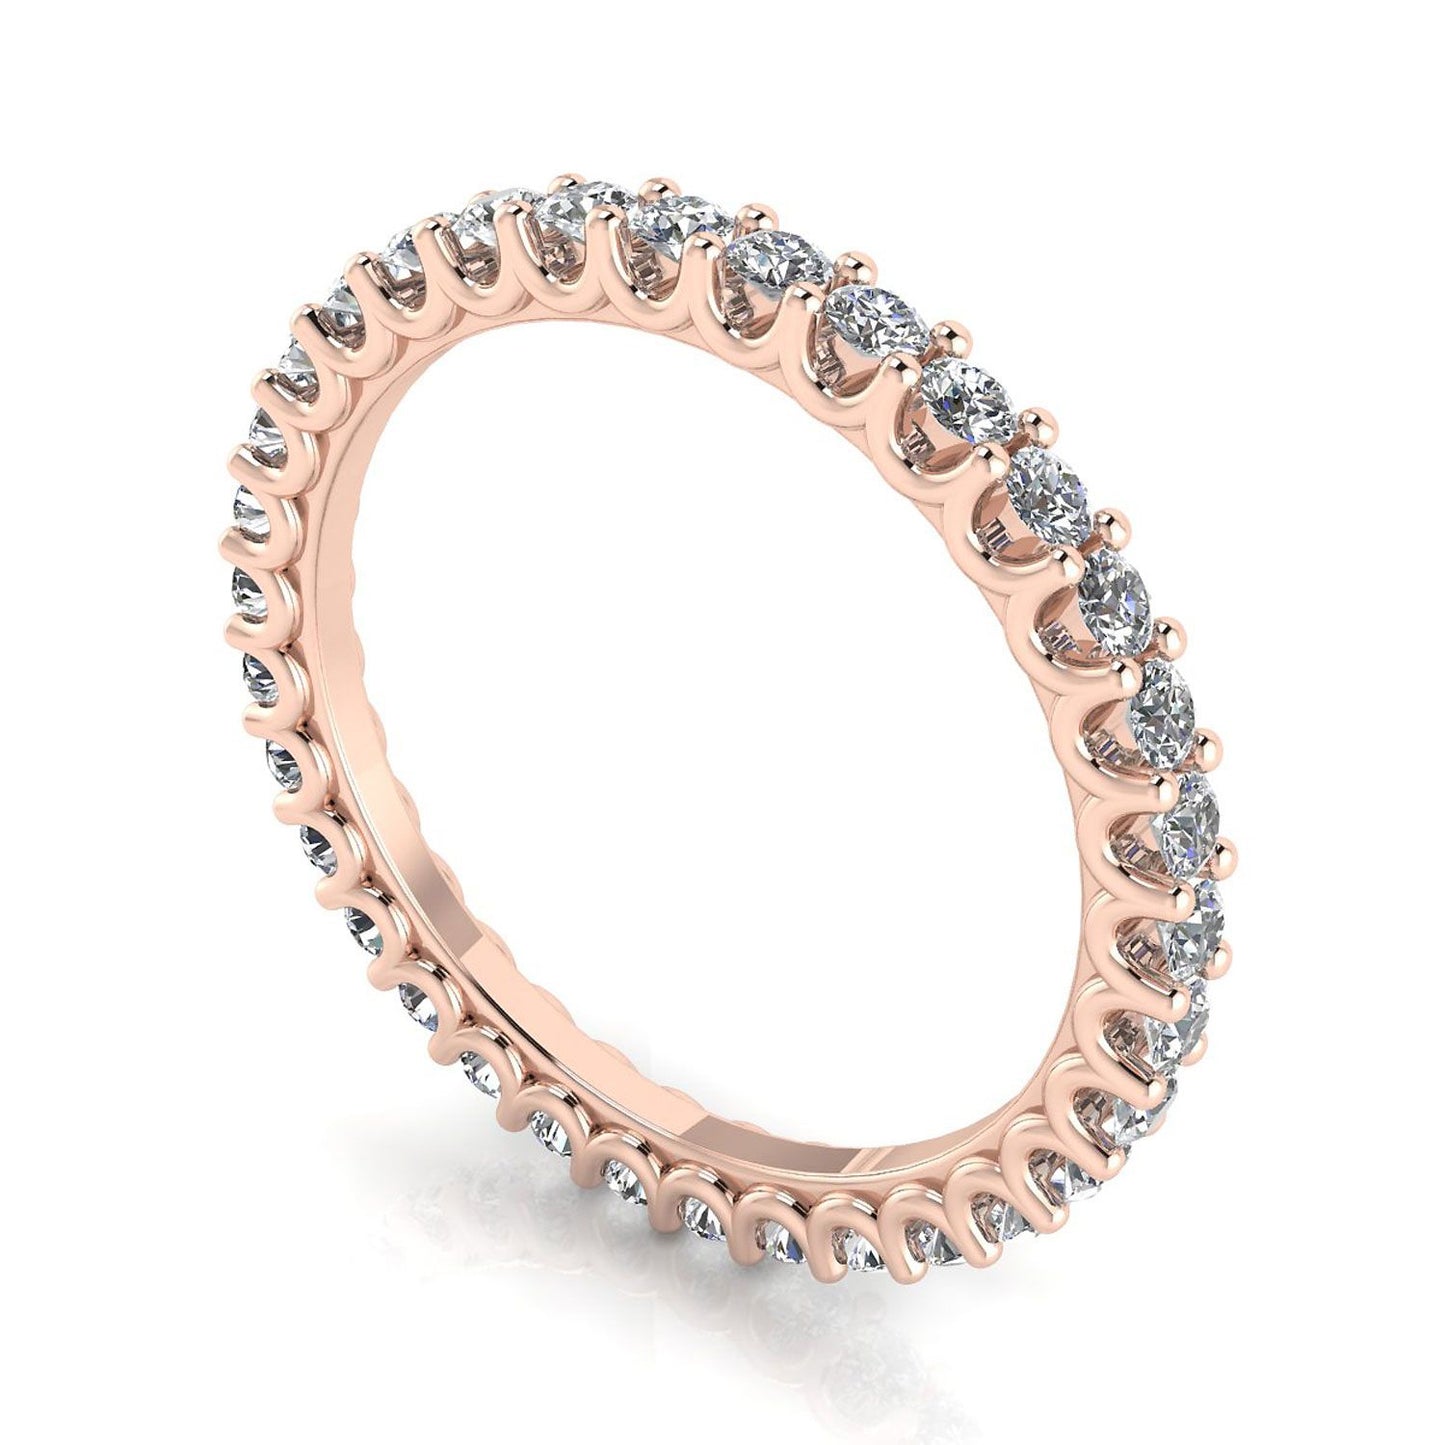 Round Brilliant Cut Diamond Shared Prong Set Eternity Ring In 14k Rose Gold  (0.72ct. Tw.) Ring Size 7.5